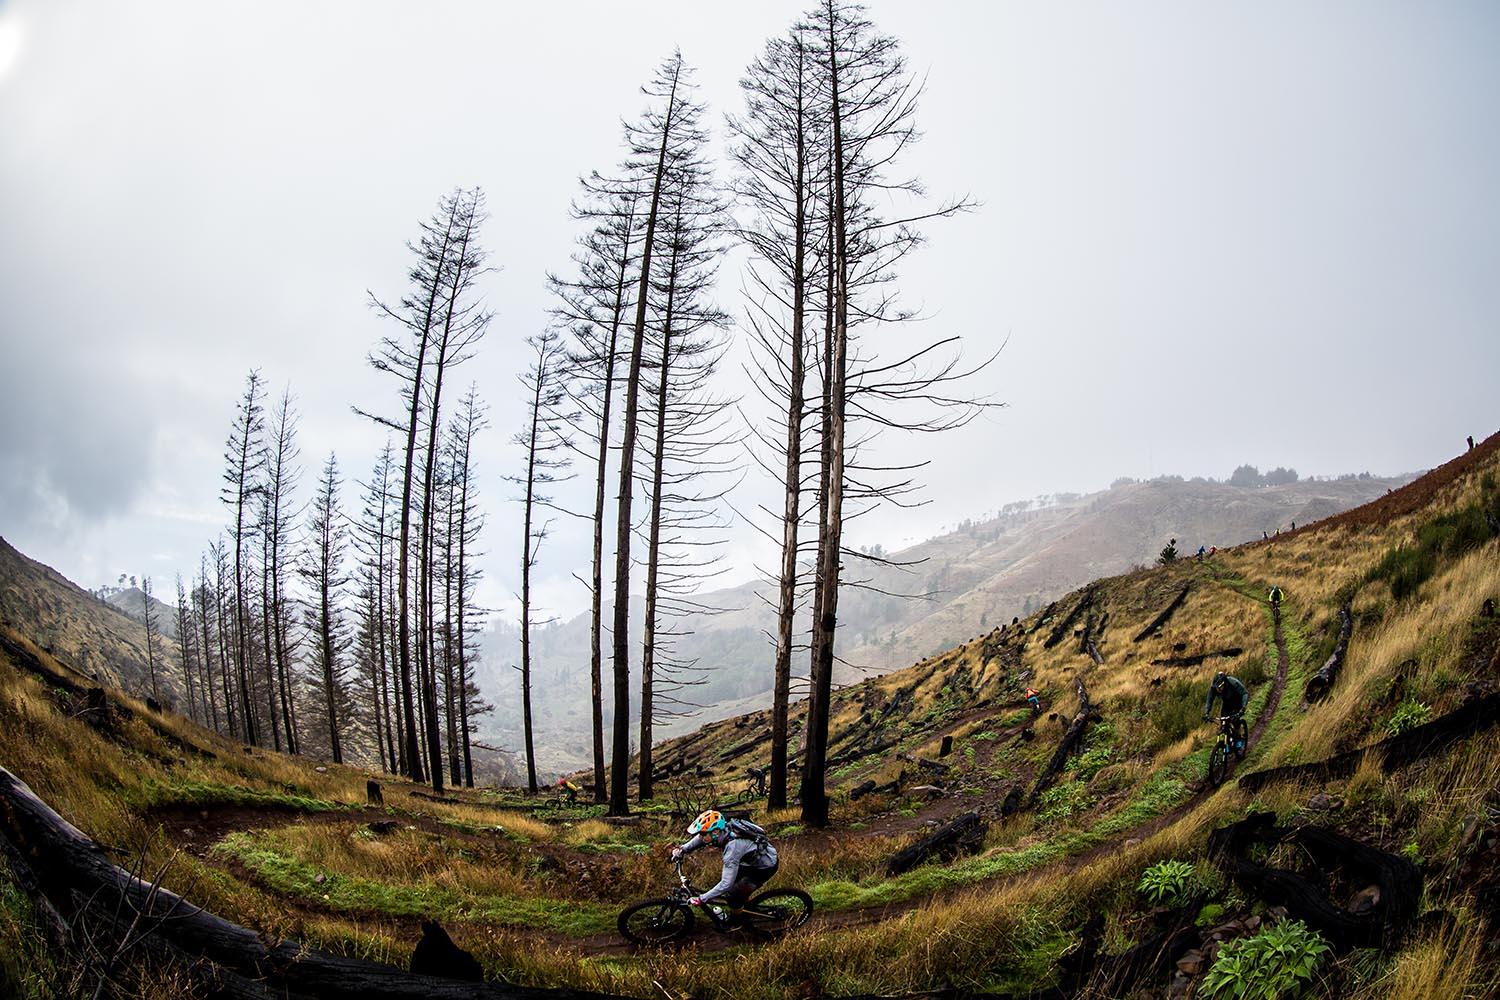 Some of Madeira's endless trails network